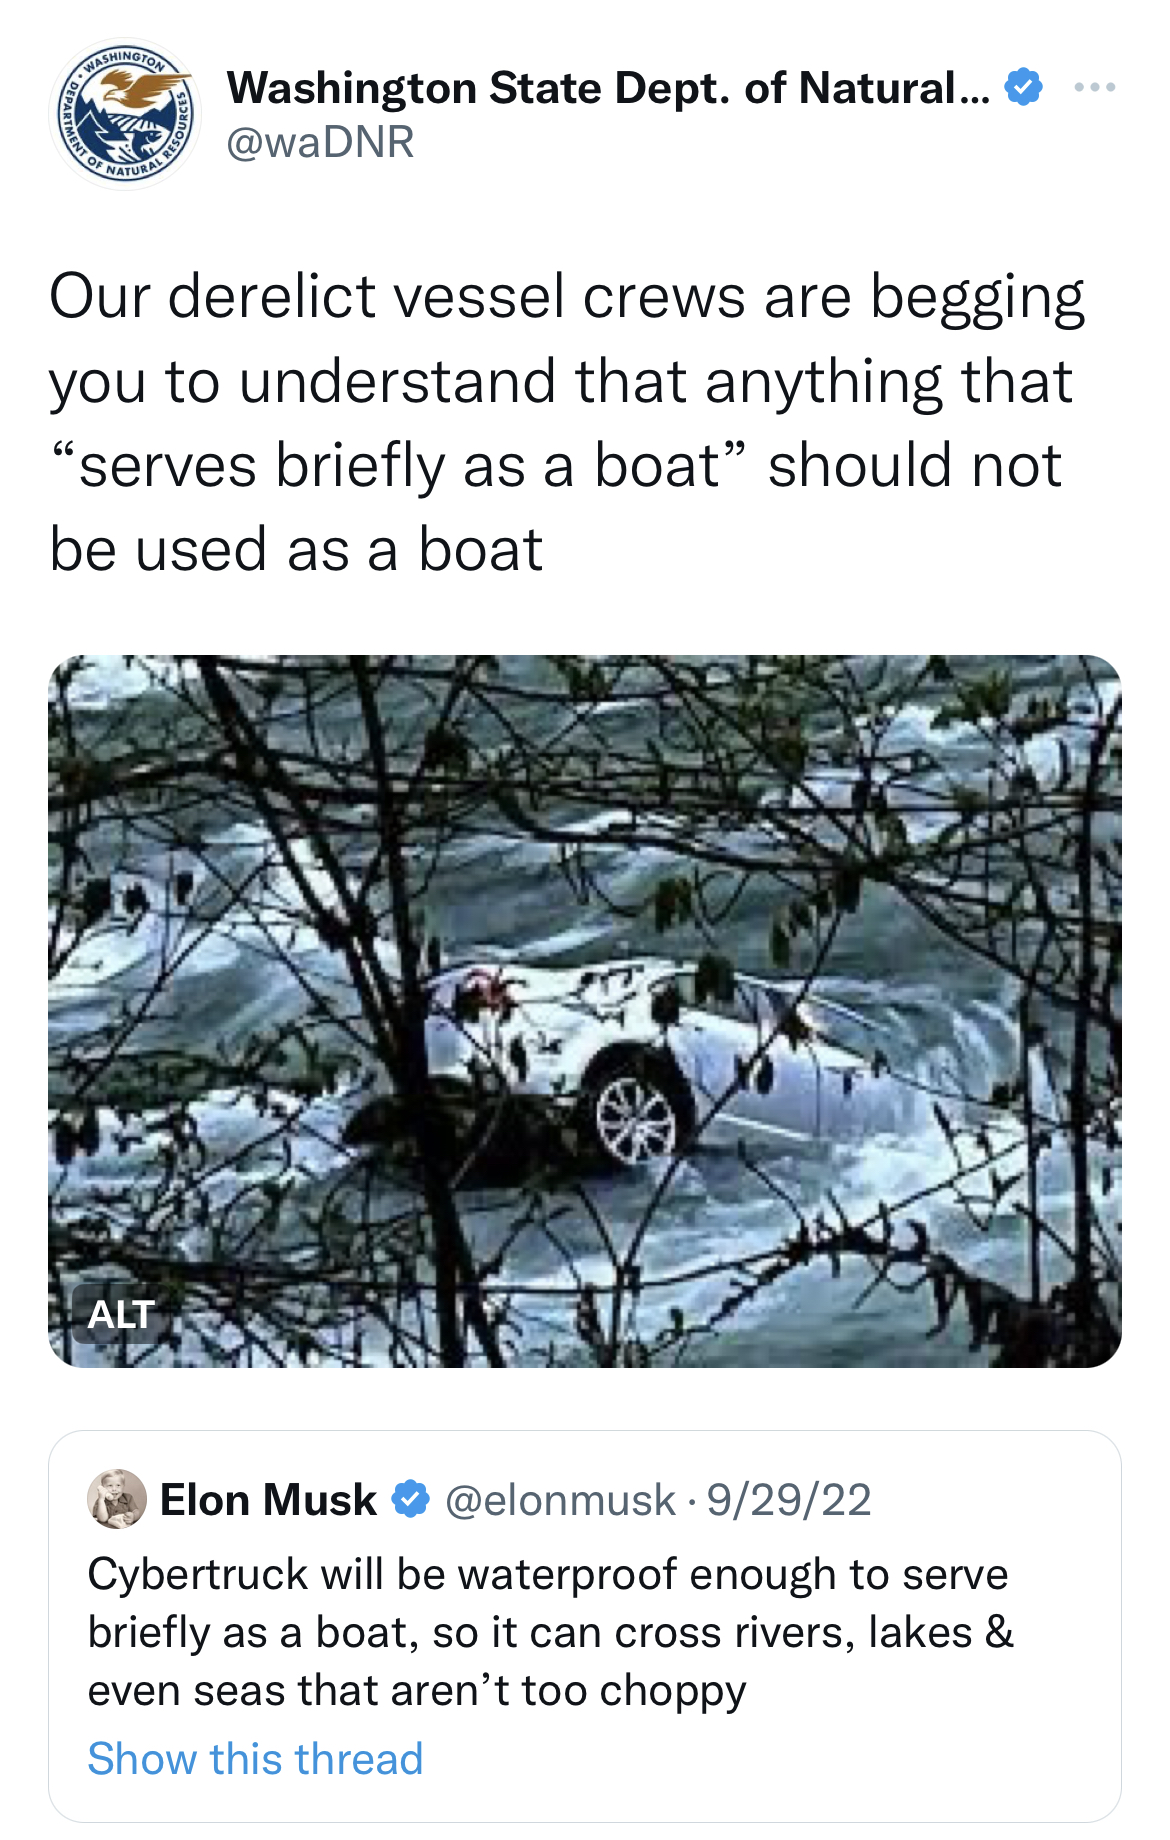 Washington Department of Natural Resources tweets - tree - Washington State Dept. of Natural... Our derelict vessel crews are begging you to understand that anything that "serves briefly as a boat" should not be used as a boat Alt Elon Musk 92922 Cybertru